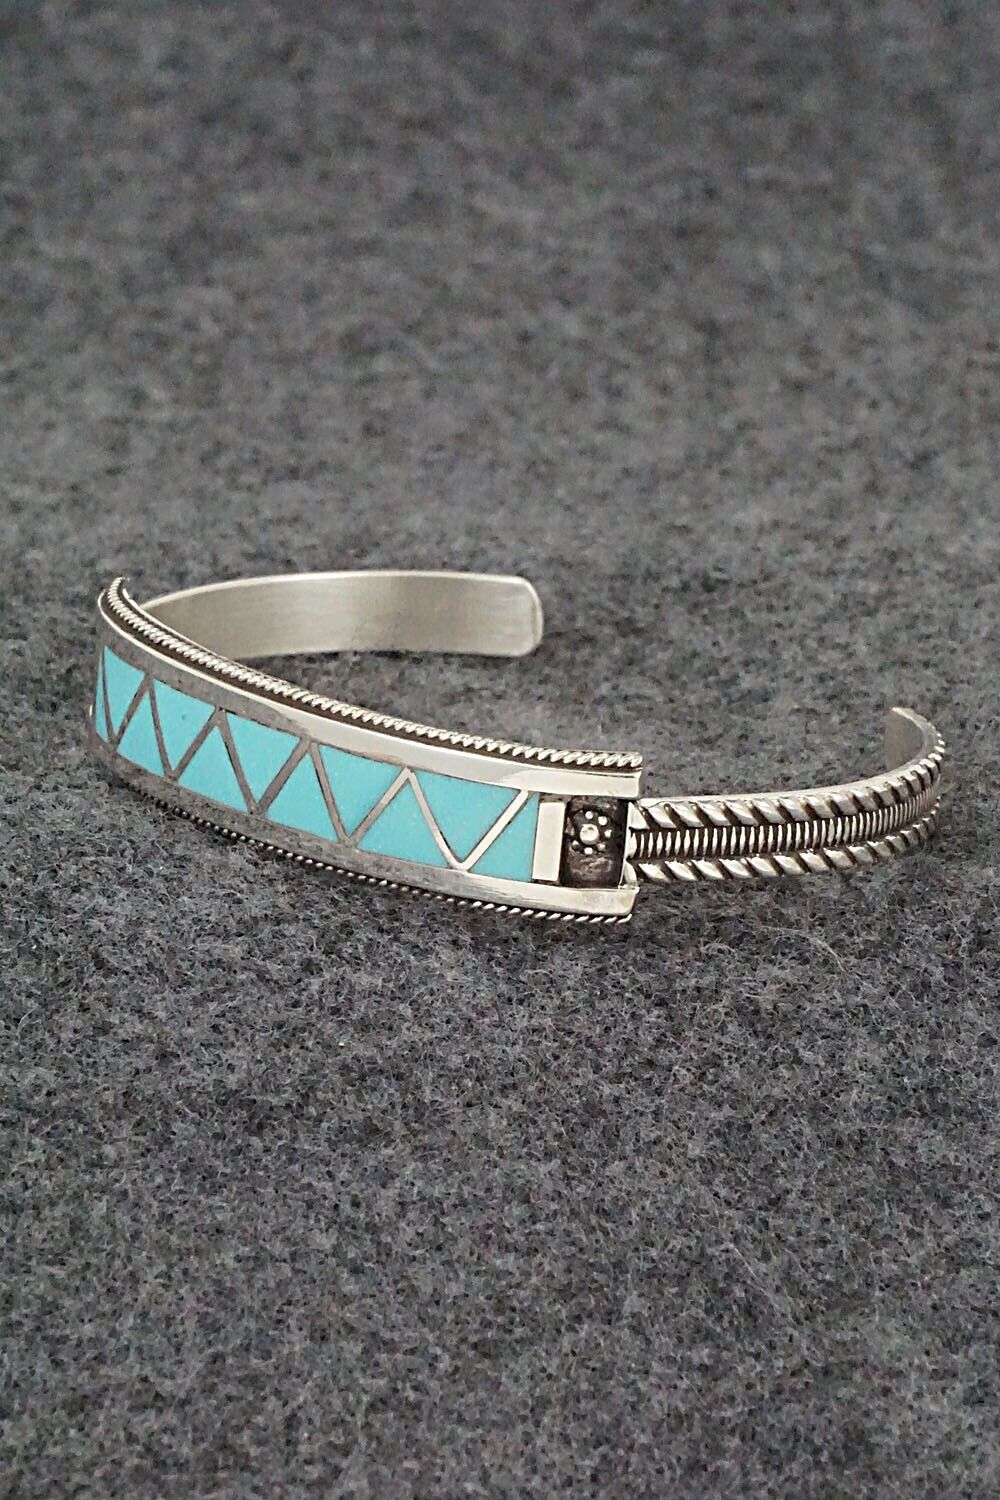 Turquoise & Sterling Silver Inlay Bracelet - Claudine Haloo